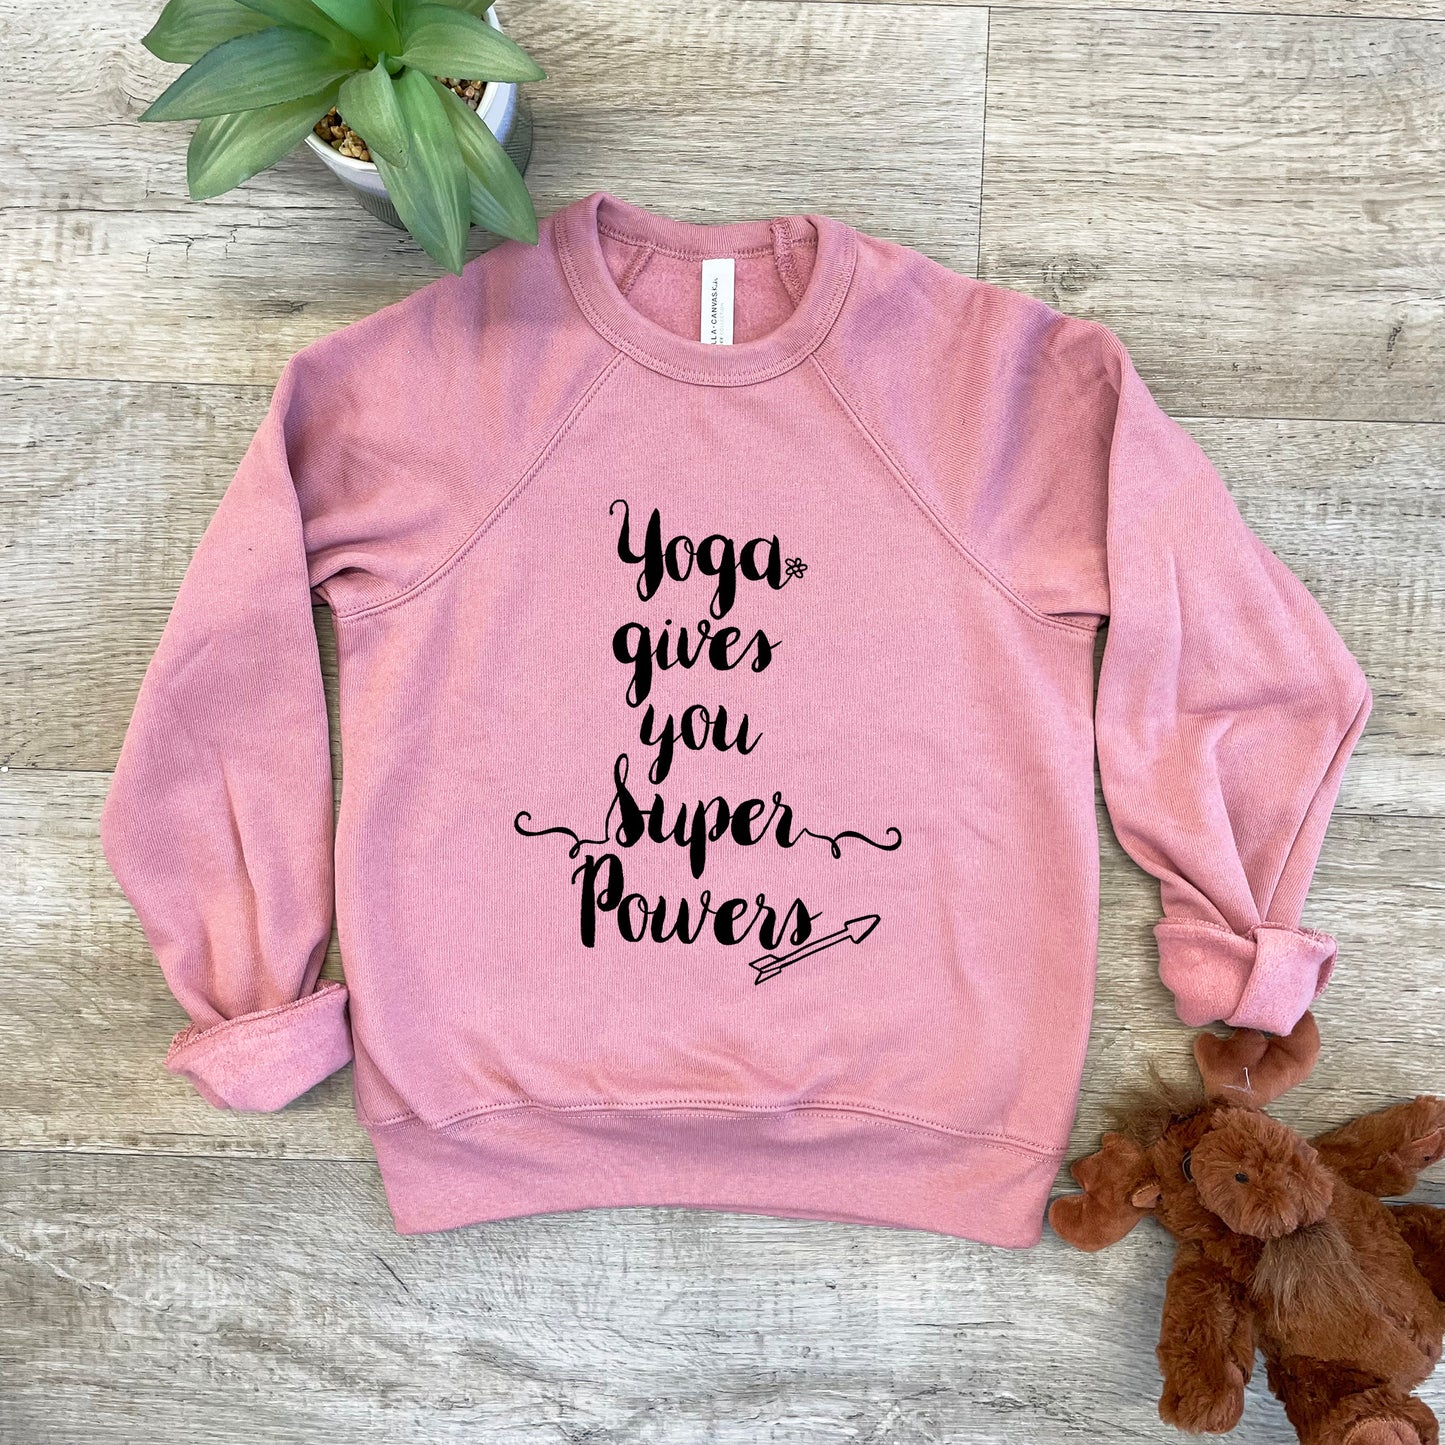 Yoga Gives You Superpowers - Kid's Sweatshirt - Heather Gray or Mauve